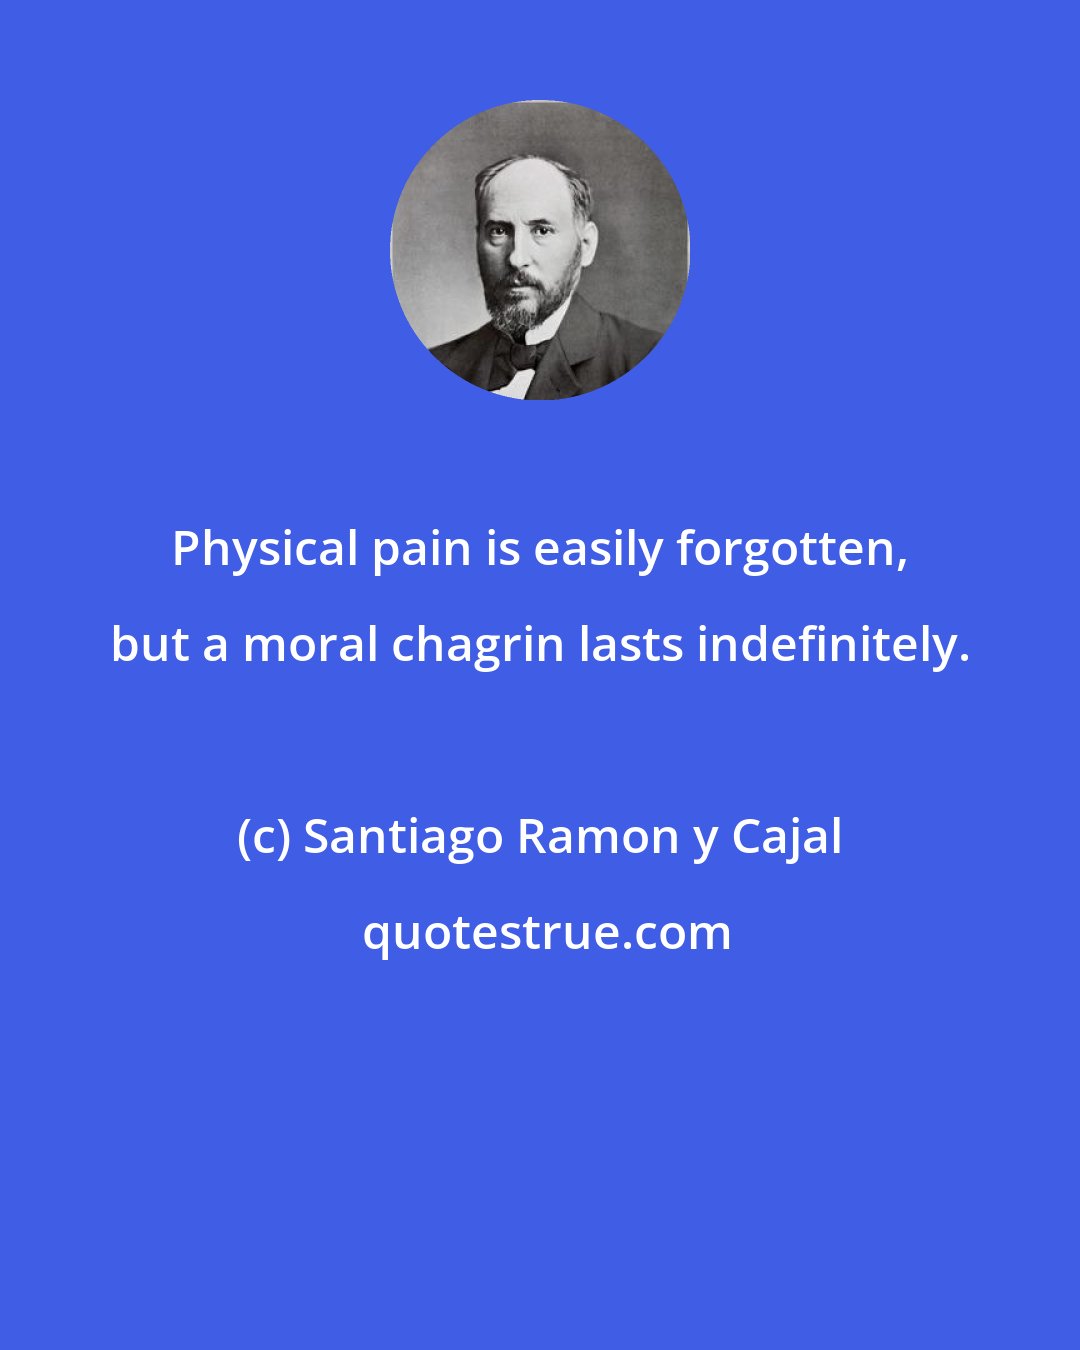 Santiago Ramon y Cajal: Physical pain is easily forgotten, but a moral chagrin lasts indefinitely.